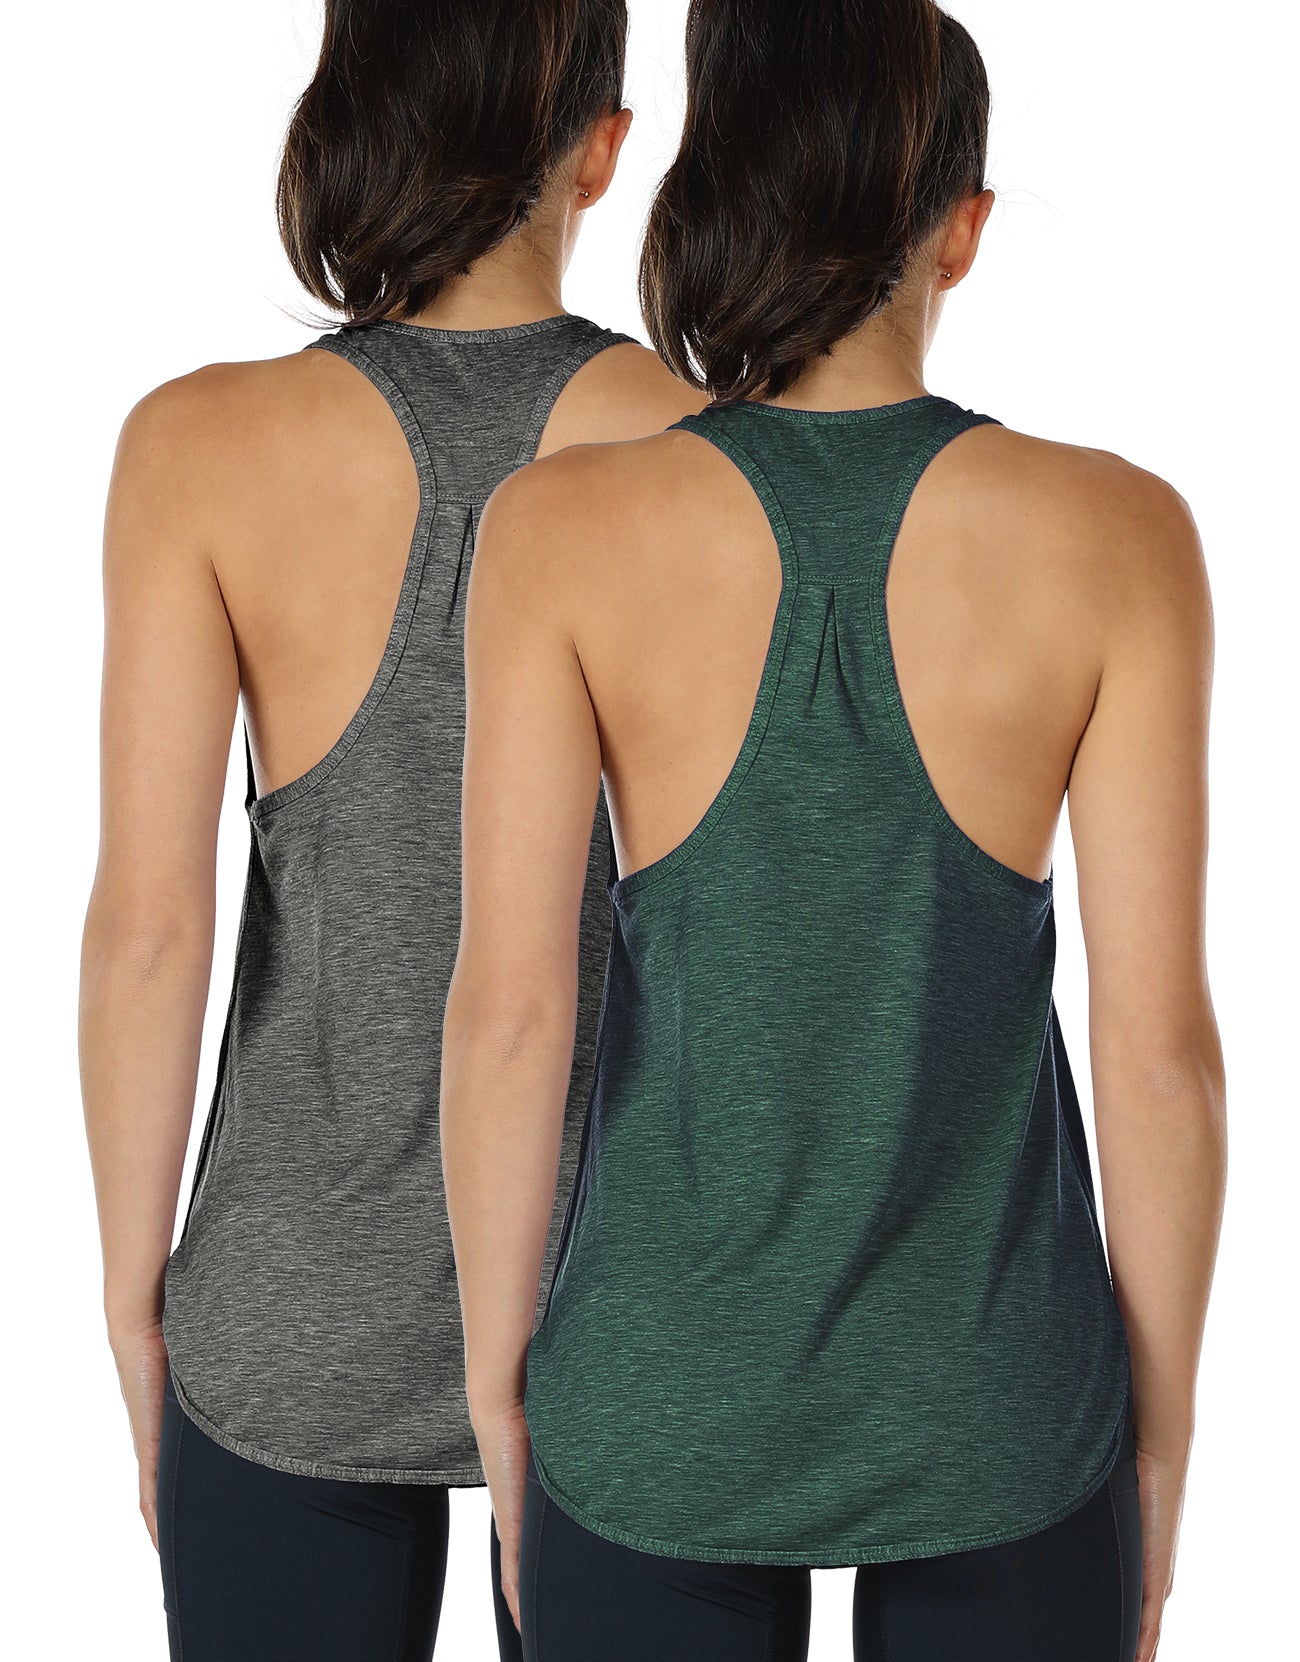 TK23 icyzone Workout Tank Tops for Women - Athletic Yoga Tops